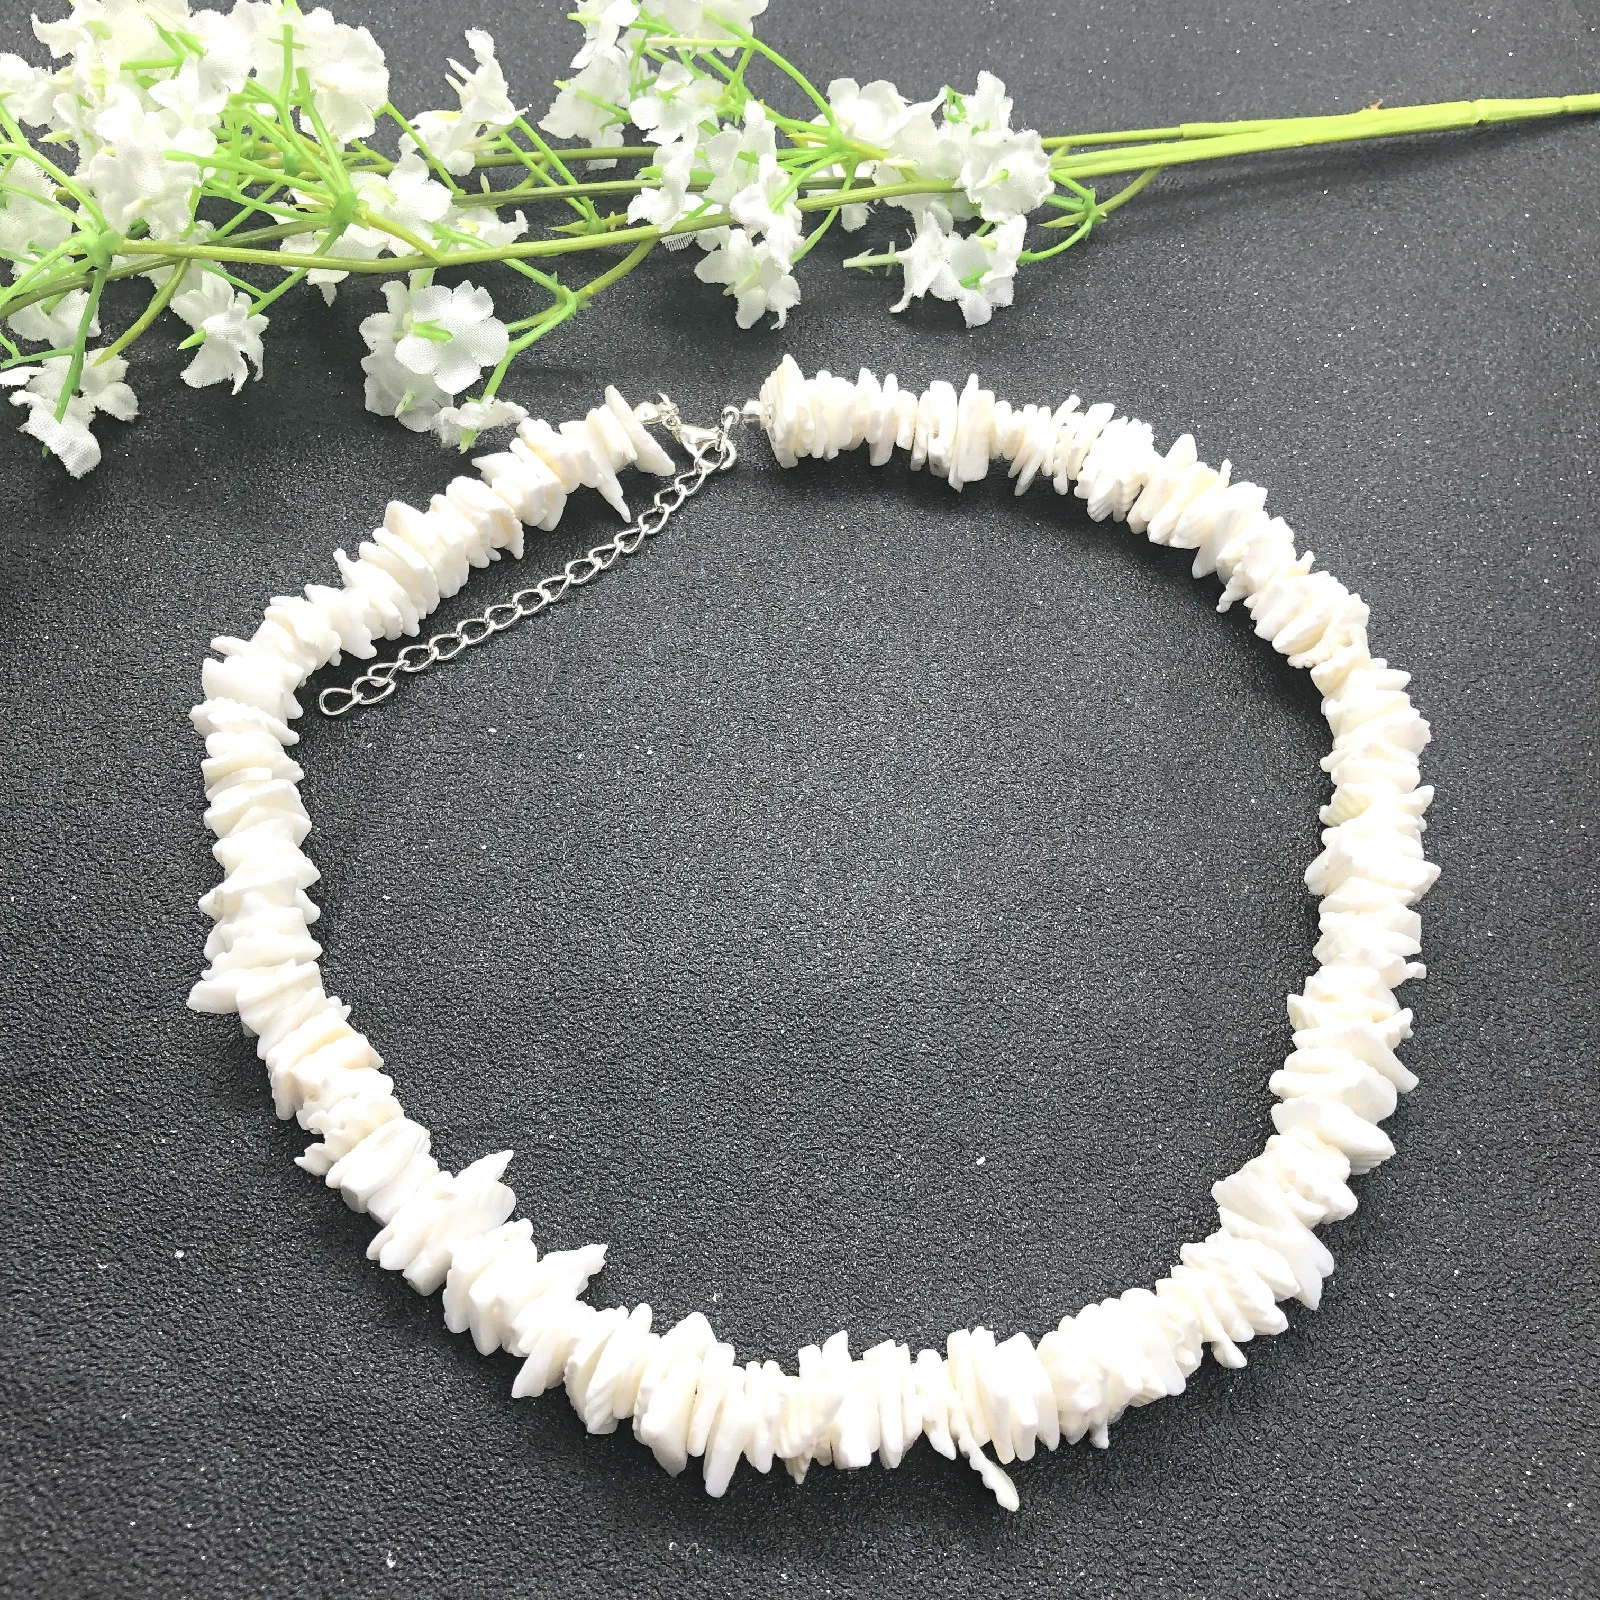 White Puka Natural Shell Piece Irregular Chips Seashell Choker Necklace Female Fashion Summer Beach Jewelry Necklaces for Women